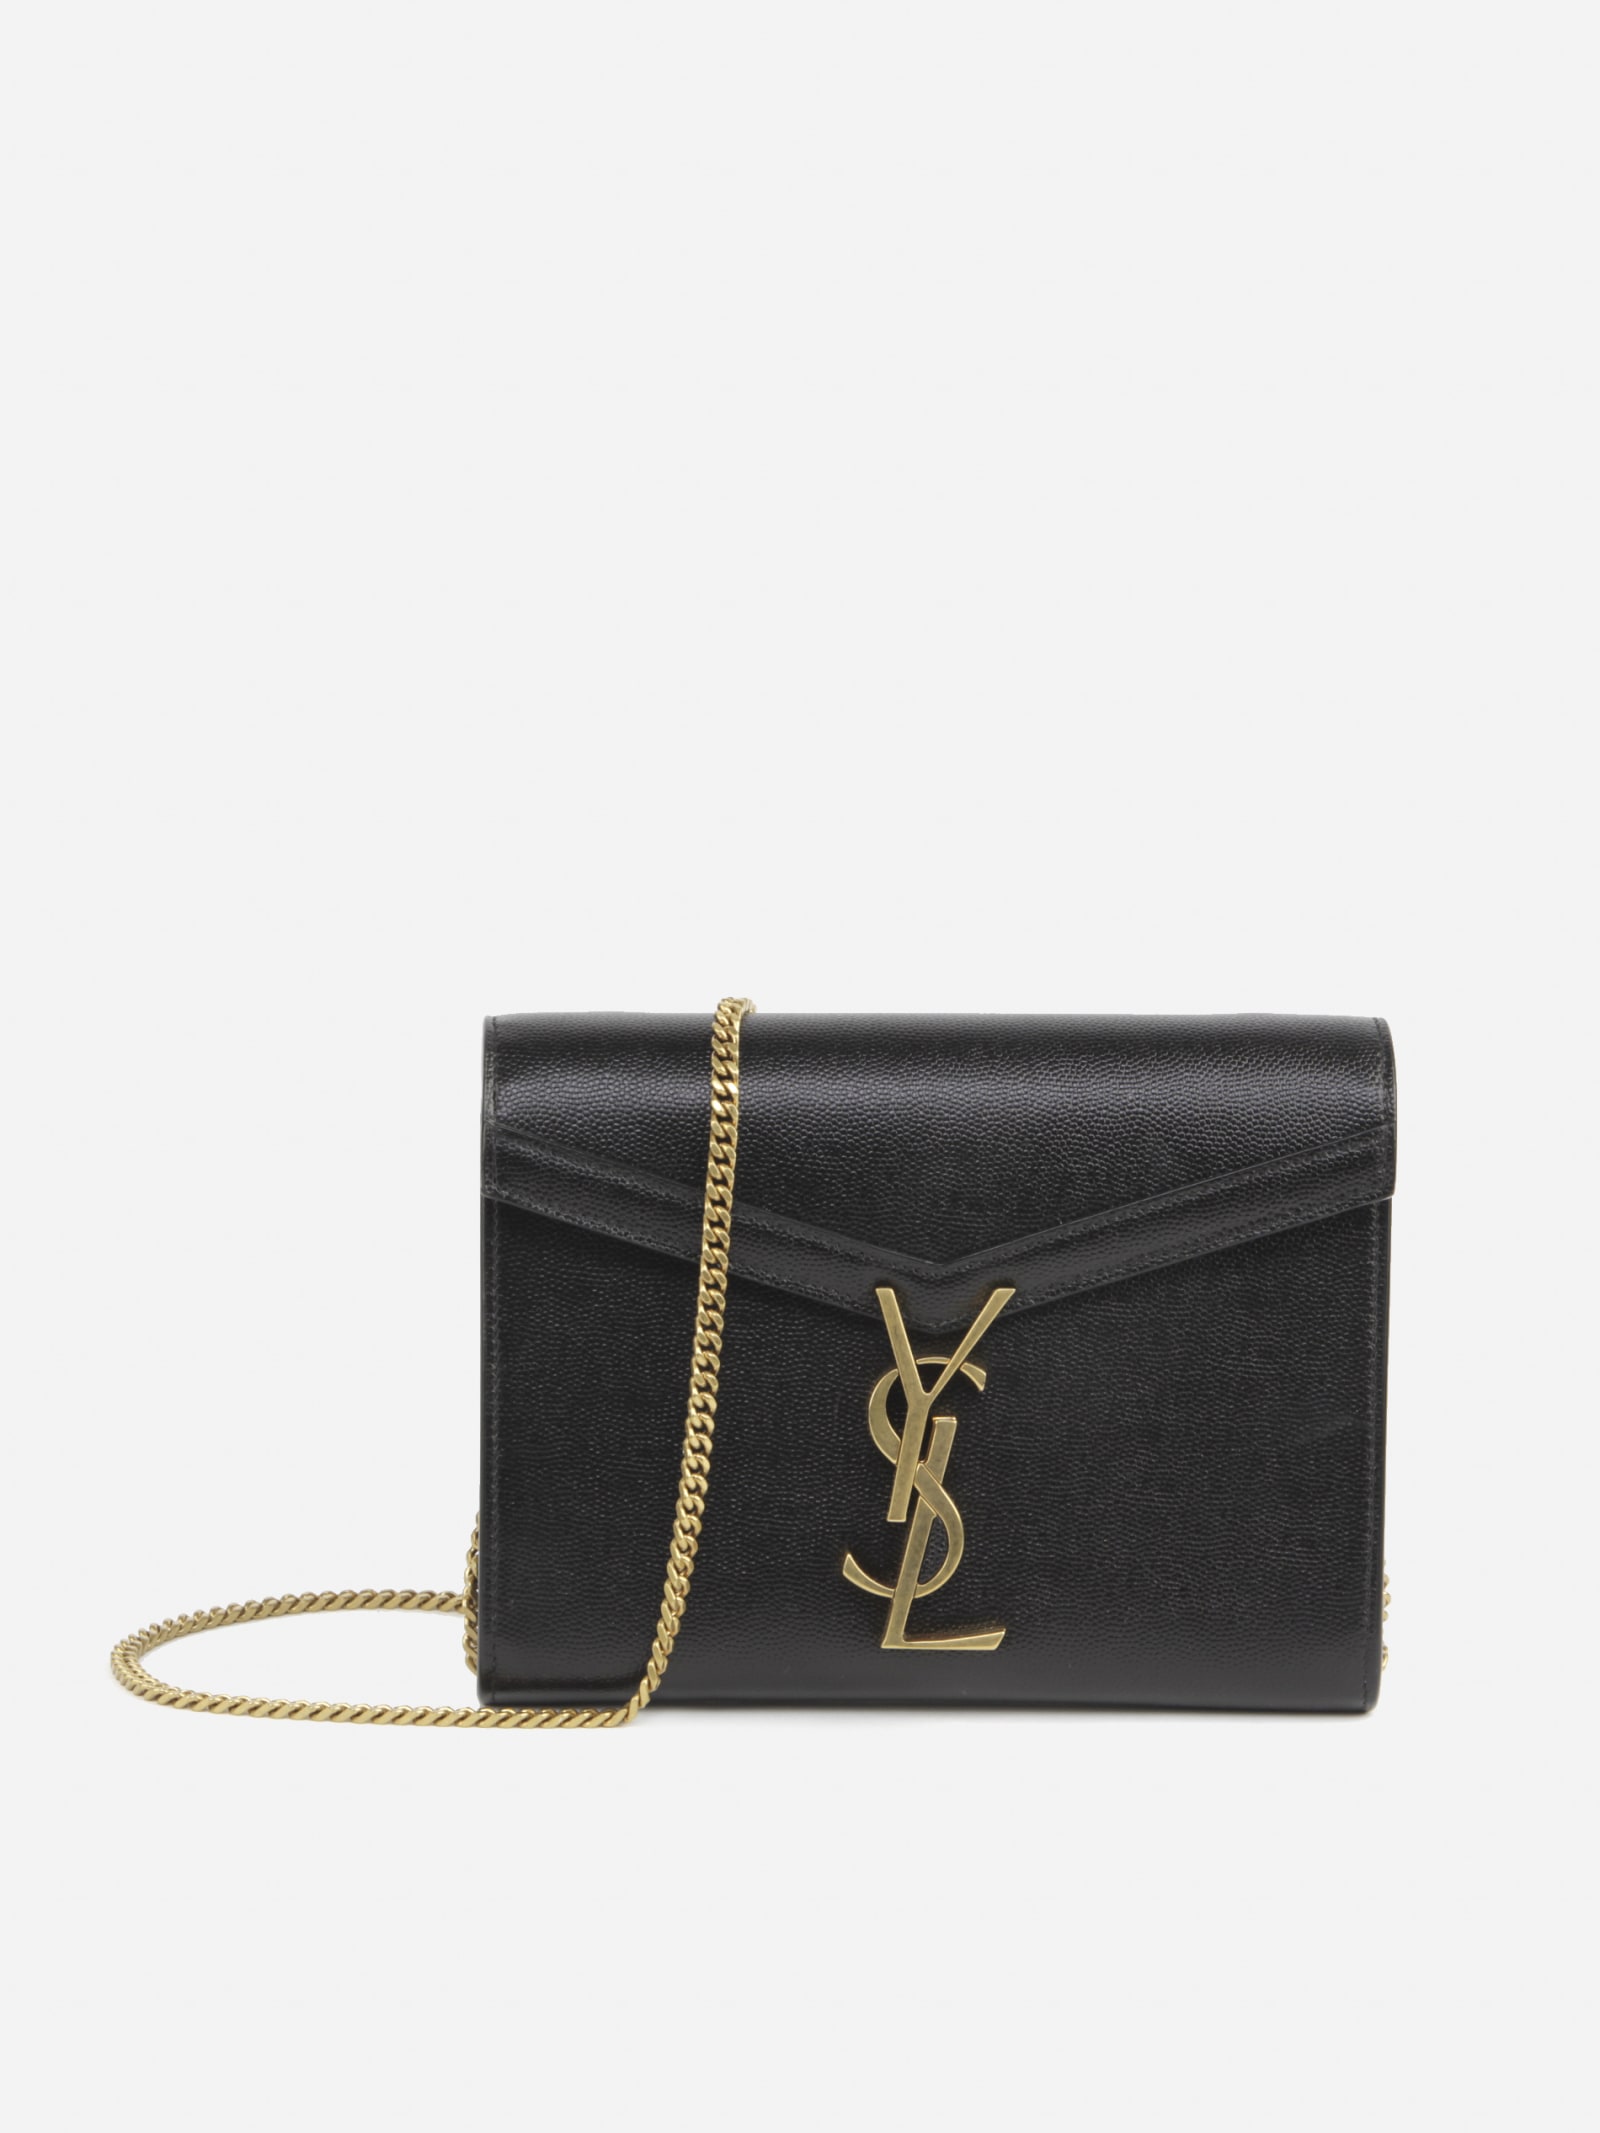 Saint Laurent WOC Cassandra Chain Wallets In Red Leather On Sale